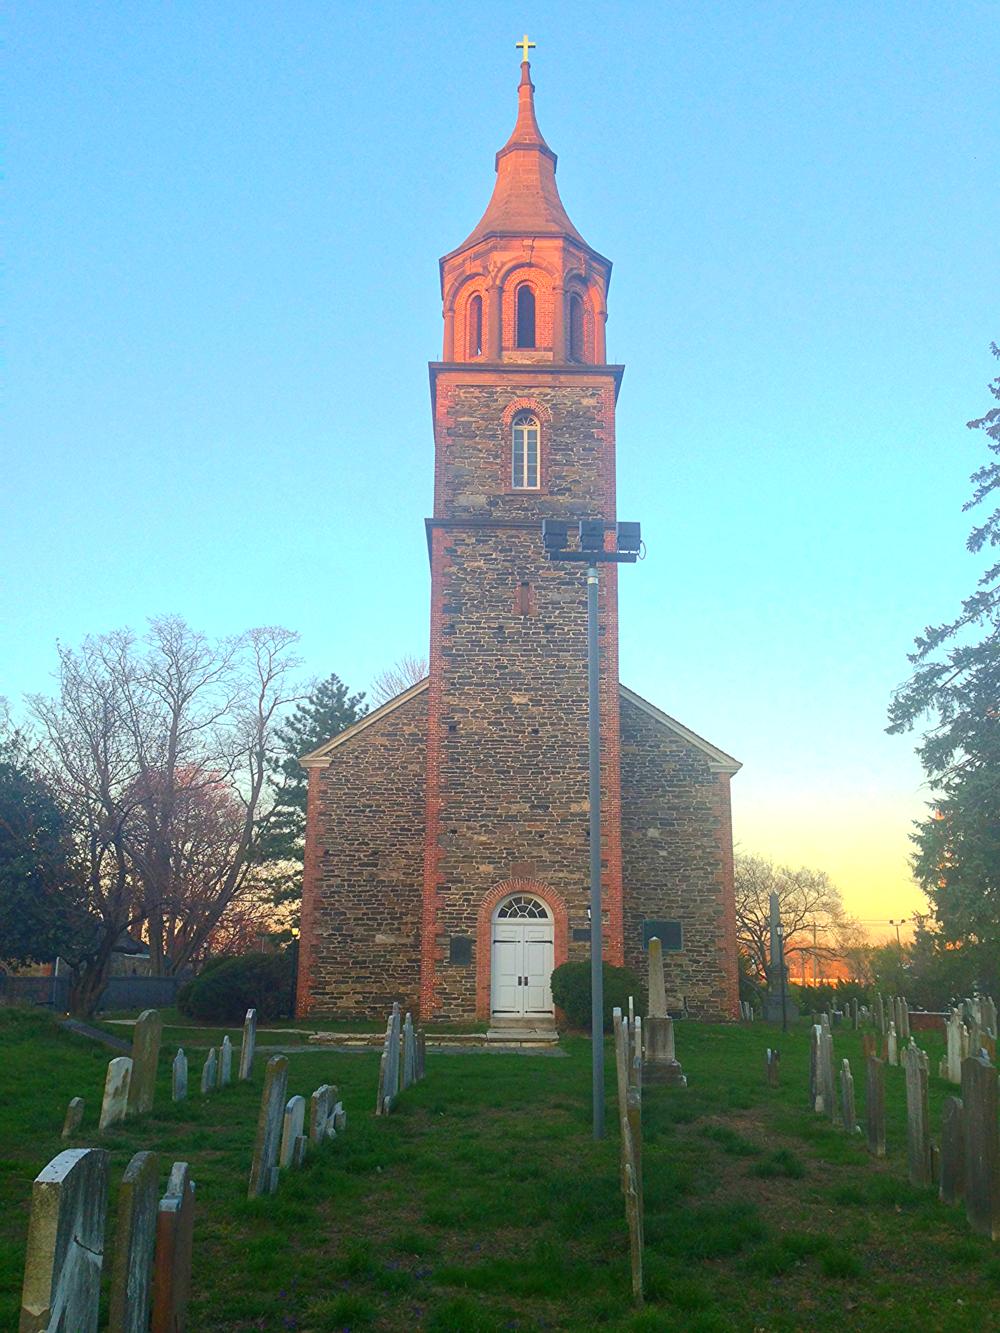 St Paul's Church, built in 1764 located in today's Mount Vernon, NY..  It was called the Church of Eastchester until 1795.  